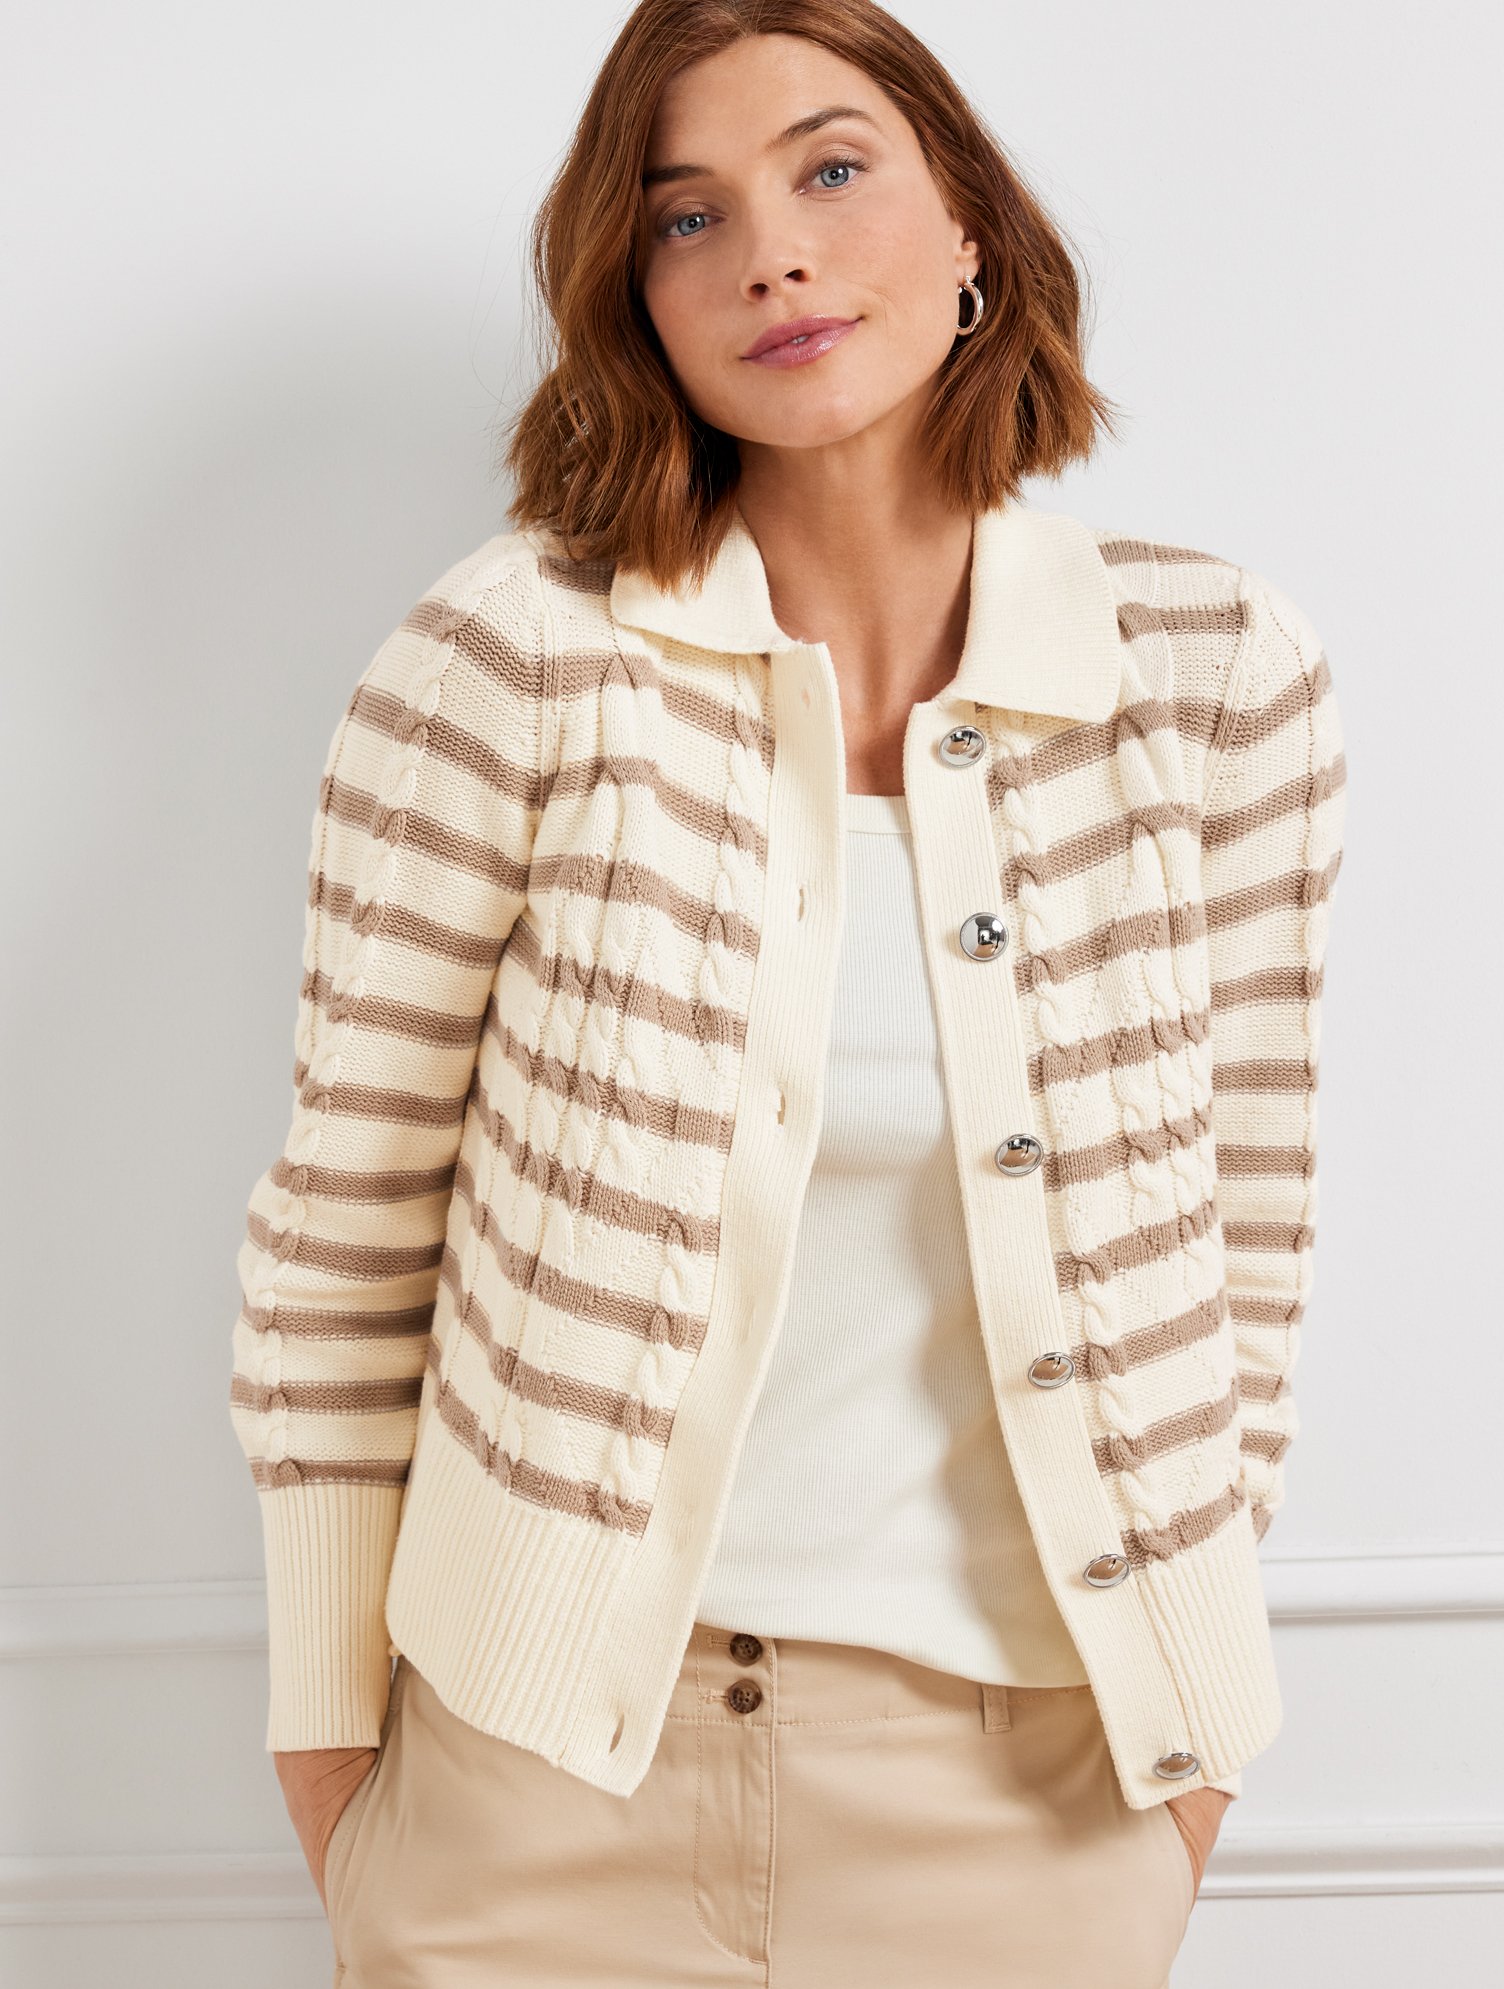 Talbots Cable Knit Collared Cardigan Sweater - Stripe - Ivory - 3x